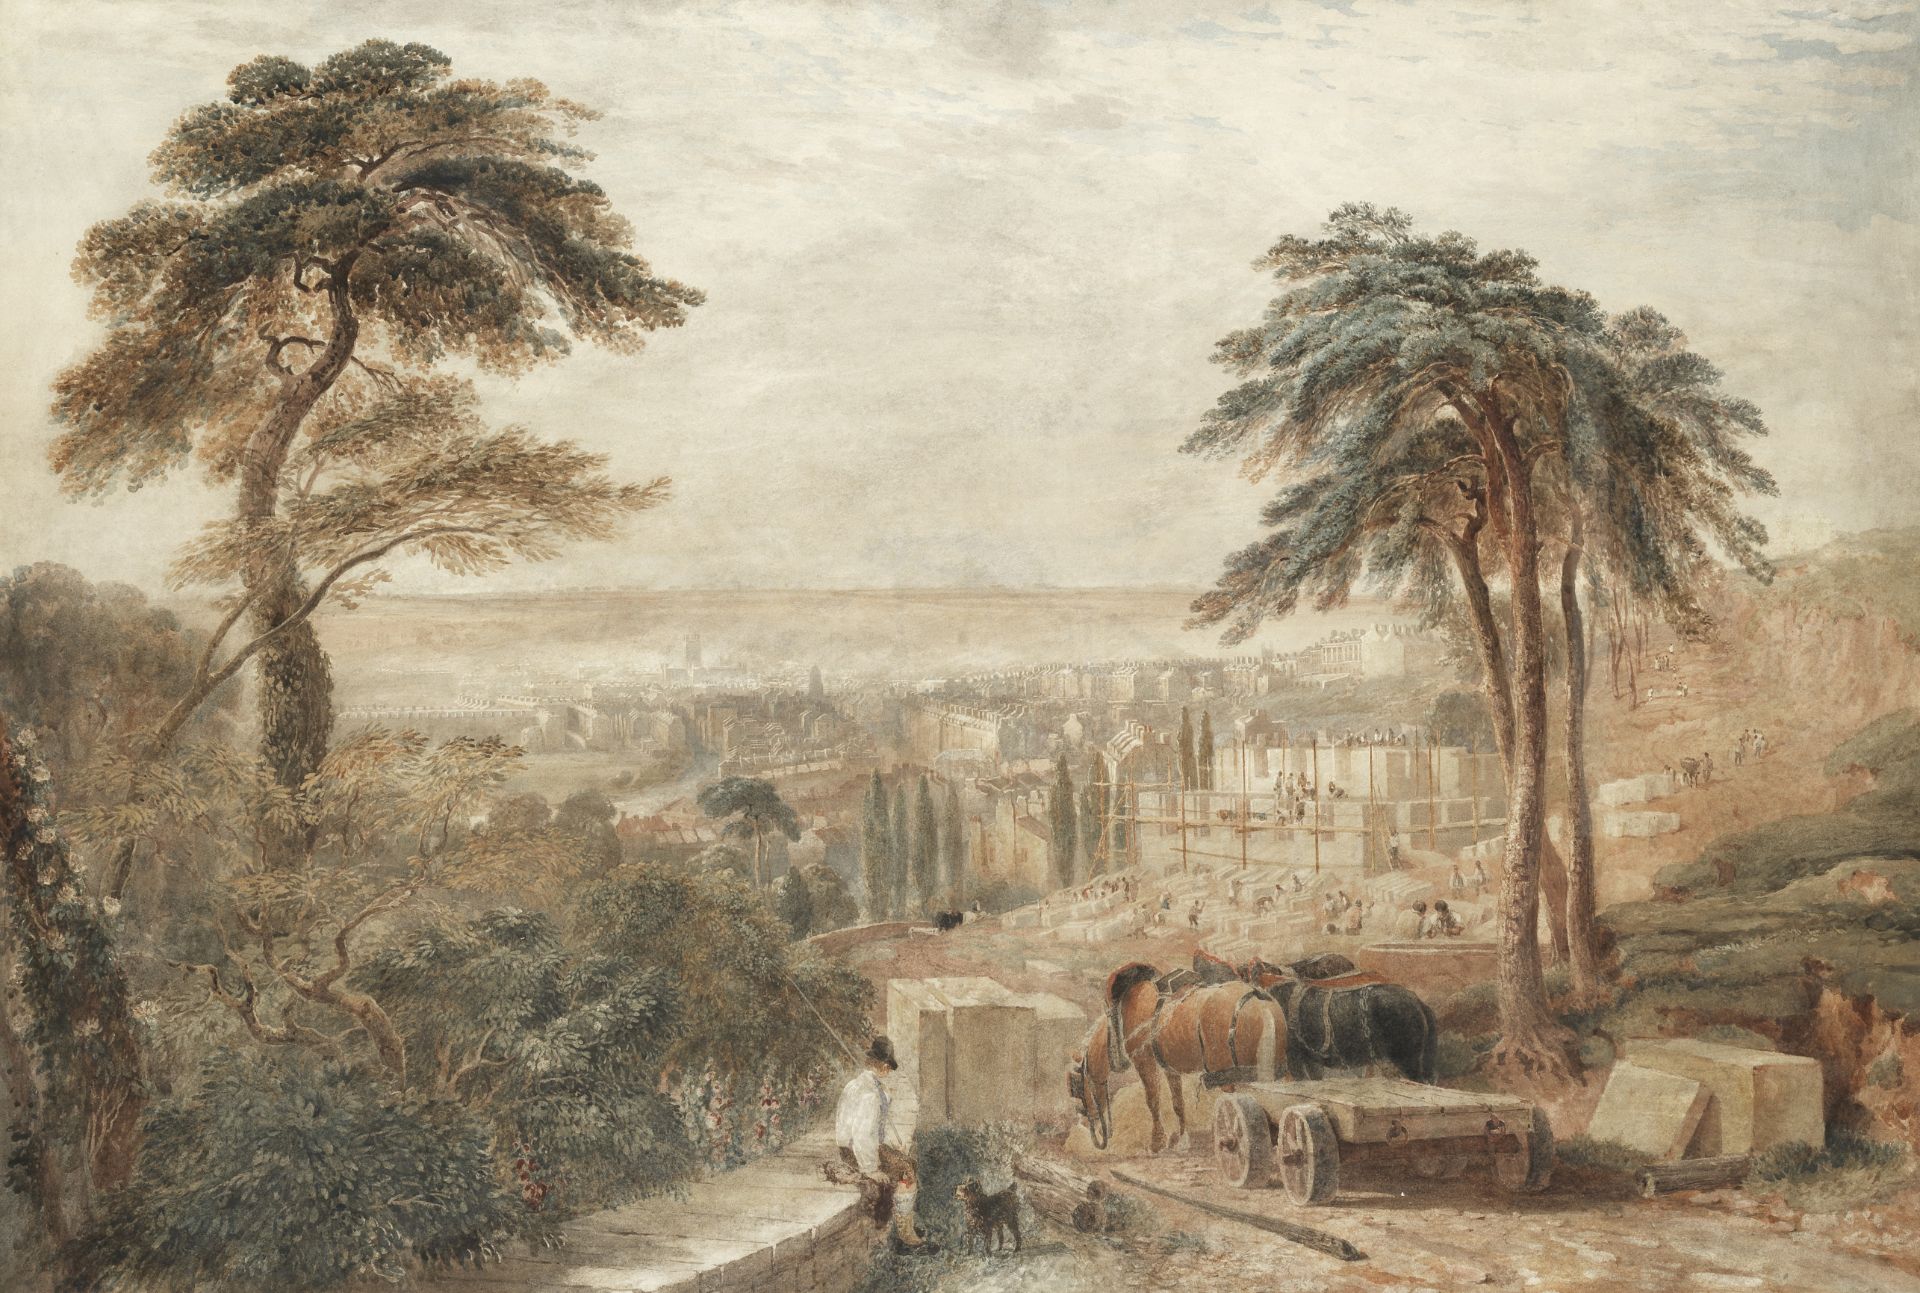 David Cox Snr. O.W.S. (British, 1783-1859) View of the City of Bath from Beacon Hill